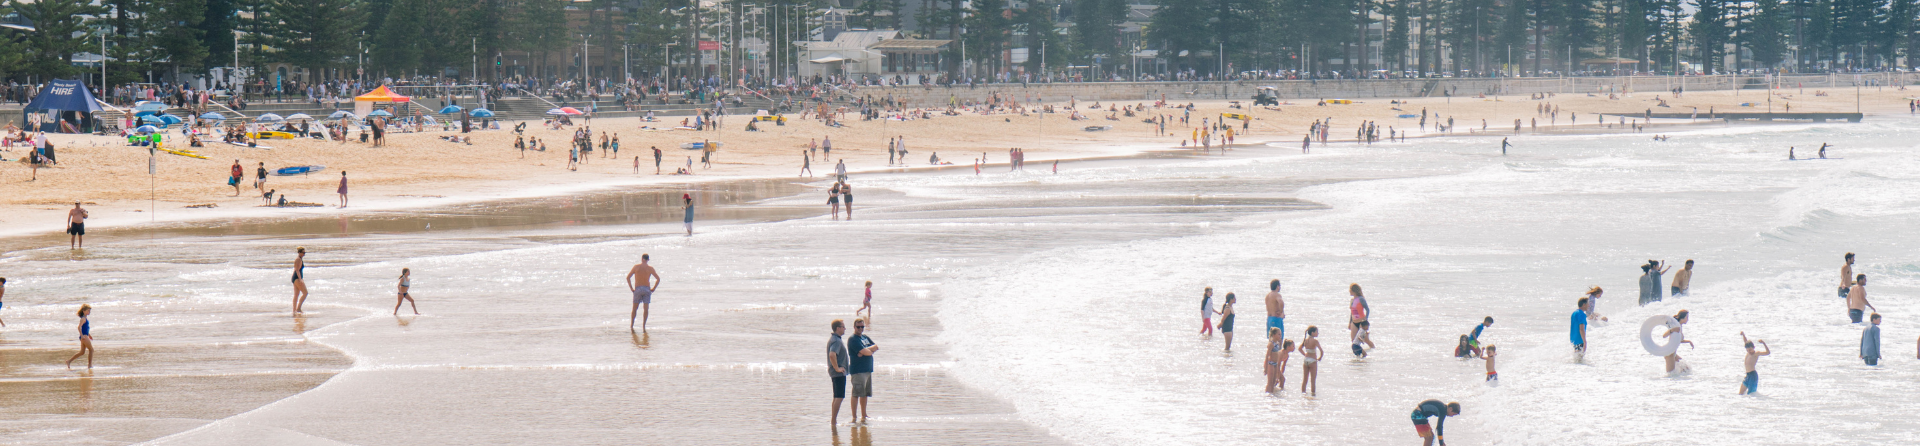 Why is Manly Beach famous?